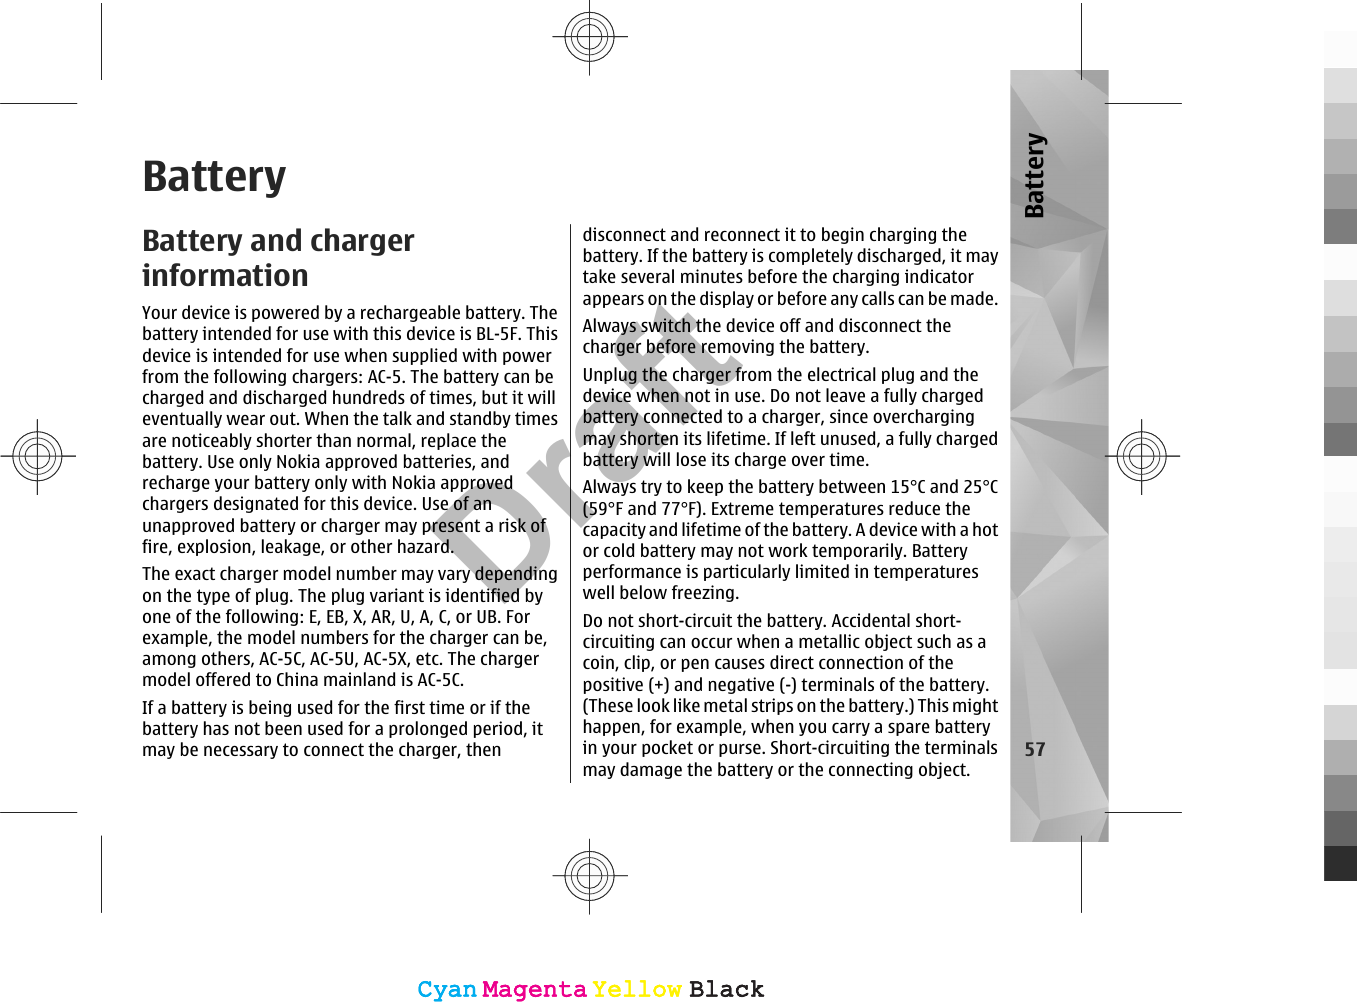 BatteryBattery and chargerinformationYour device is powered by a rechargeable battery. Thebattery intended for use with this device is BL-5F. Thisdevice is intended for use when supplied with powerfrom the following chargers: AC-5. The battery can becharged and discharged hundreds of times, but it willeventually wear out. When the talk and standby timesare noticeably shorter than normal, replace thebattery. Use only Nokia approved batteries, andrecharge your battery only with Nokia approvedchargers designated for this device. Use of anunapproved battery or charger may present a risk offire, explosion, leakage, or other hazard.The exact charger model number may vary dependingon the type of plug. The plug variant is identified byone of the following: E, EB, X, AR, U, A, C, or UB. Forexample, the model numbers for the charger can be,among others, AC-5C, AC-5U, AC-5X, etc. The chargermodel offered to China mainland is AC-5C.If a battery is being used for the first time or if thebattery has not been used for a prolonged period, itmay be necessary to connect the charger, thendisconnect and reconnect it to begin charging thebattery. If the battery is completely discharged, it maytake several minutes before the charging indicatorappears on the display or before any calls can be made.Always switch the device off and disconnect thecharger before removing the battery.Unplug the charger from the electrical plug and thedevice when not in use. Do not leave a fully chargedbattery connected to a charger, since overchargingmay shorten its lifetime. If left unused, a fully chargedbattery will lose its charge over time.Always try to keep the battery between 15°C and 25°C(59°F and 77°F). Extreme temperatures reduce thecapacity and lifetime of the battery. A device with a hotor cold battery may not work temporarily. Batteryperformance is particularly limited in temperatureswell below freezing.Do not short-circuit the battery. Accidental short-circuiting can occur when a metallic object such as acoin, clip, or pen causes direct connection of thepositive (+) and negative (-) terminals of the battery.(These look like metal strips on the battery.) This mighthappen, for example, when you carry a spare batteryin your pocket or purse. Short-circuiting the terminalsmay damage the battery or the connecting object.57BatteryCyanCyanMagentaMagentaYellowYellowBlackBlackCyanCyanMagentaMagentaYellowYellowBlackBlackDraft